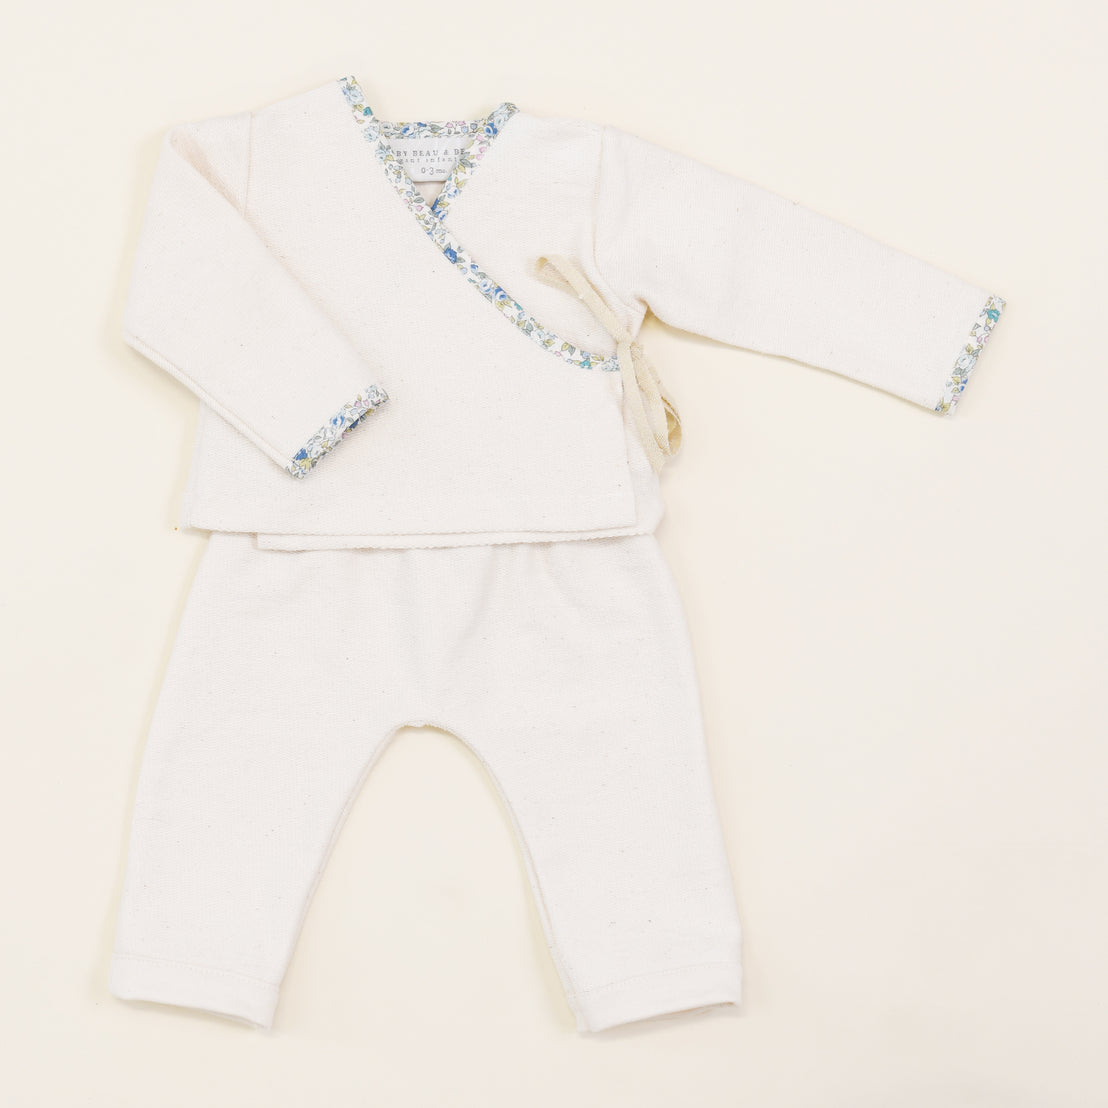 An upscale, boutique Petite Fleur Wrap Top & Pants baby kimono top with floral trim and matching white pants, displayed flat on a light beige background.